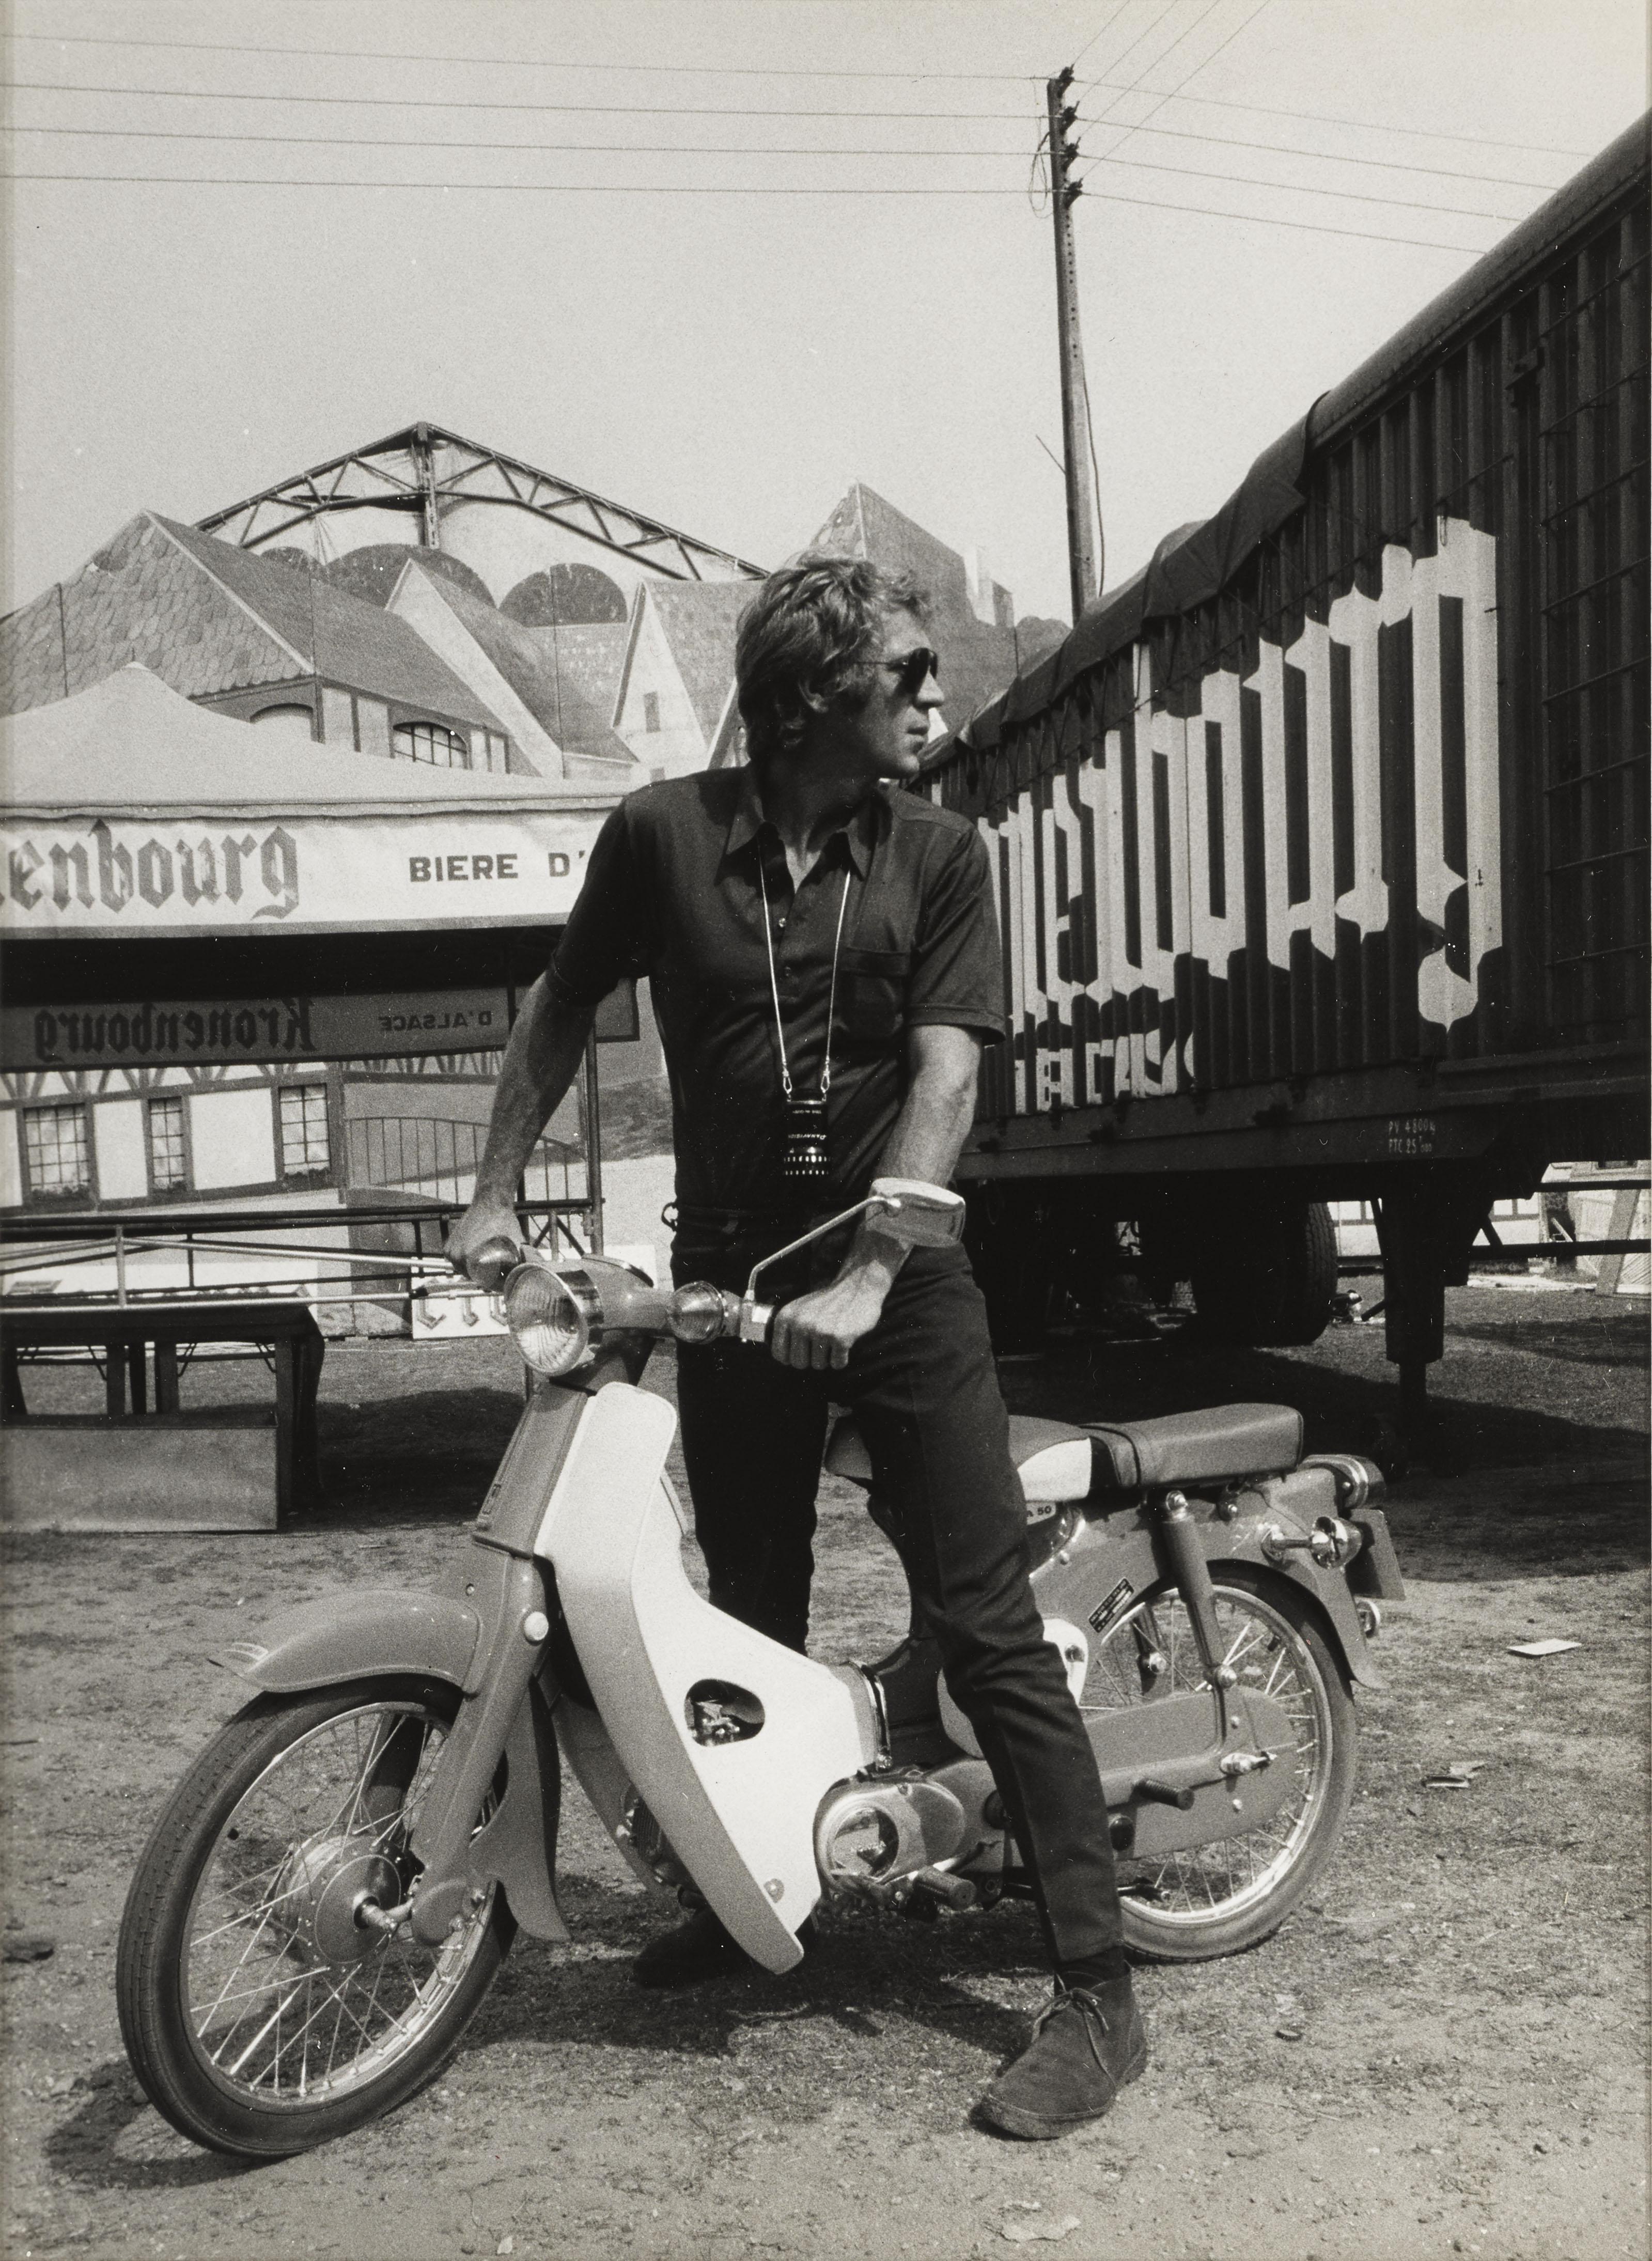 Original photograph from Reporters Associes Paris c.1970 with Steve Mcqueen on a moped with sunglasses and light meter. This production still is conservation framed in a Sapele wood frame and card mount with UV plexiglass.
The size given is before